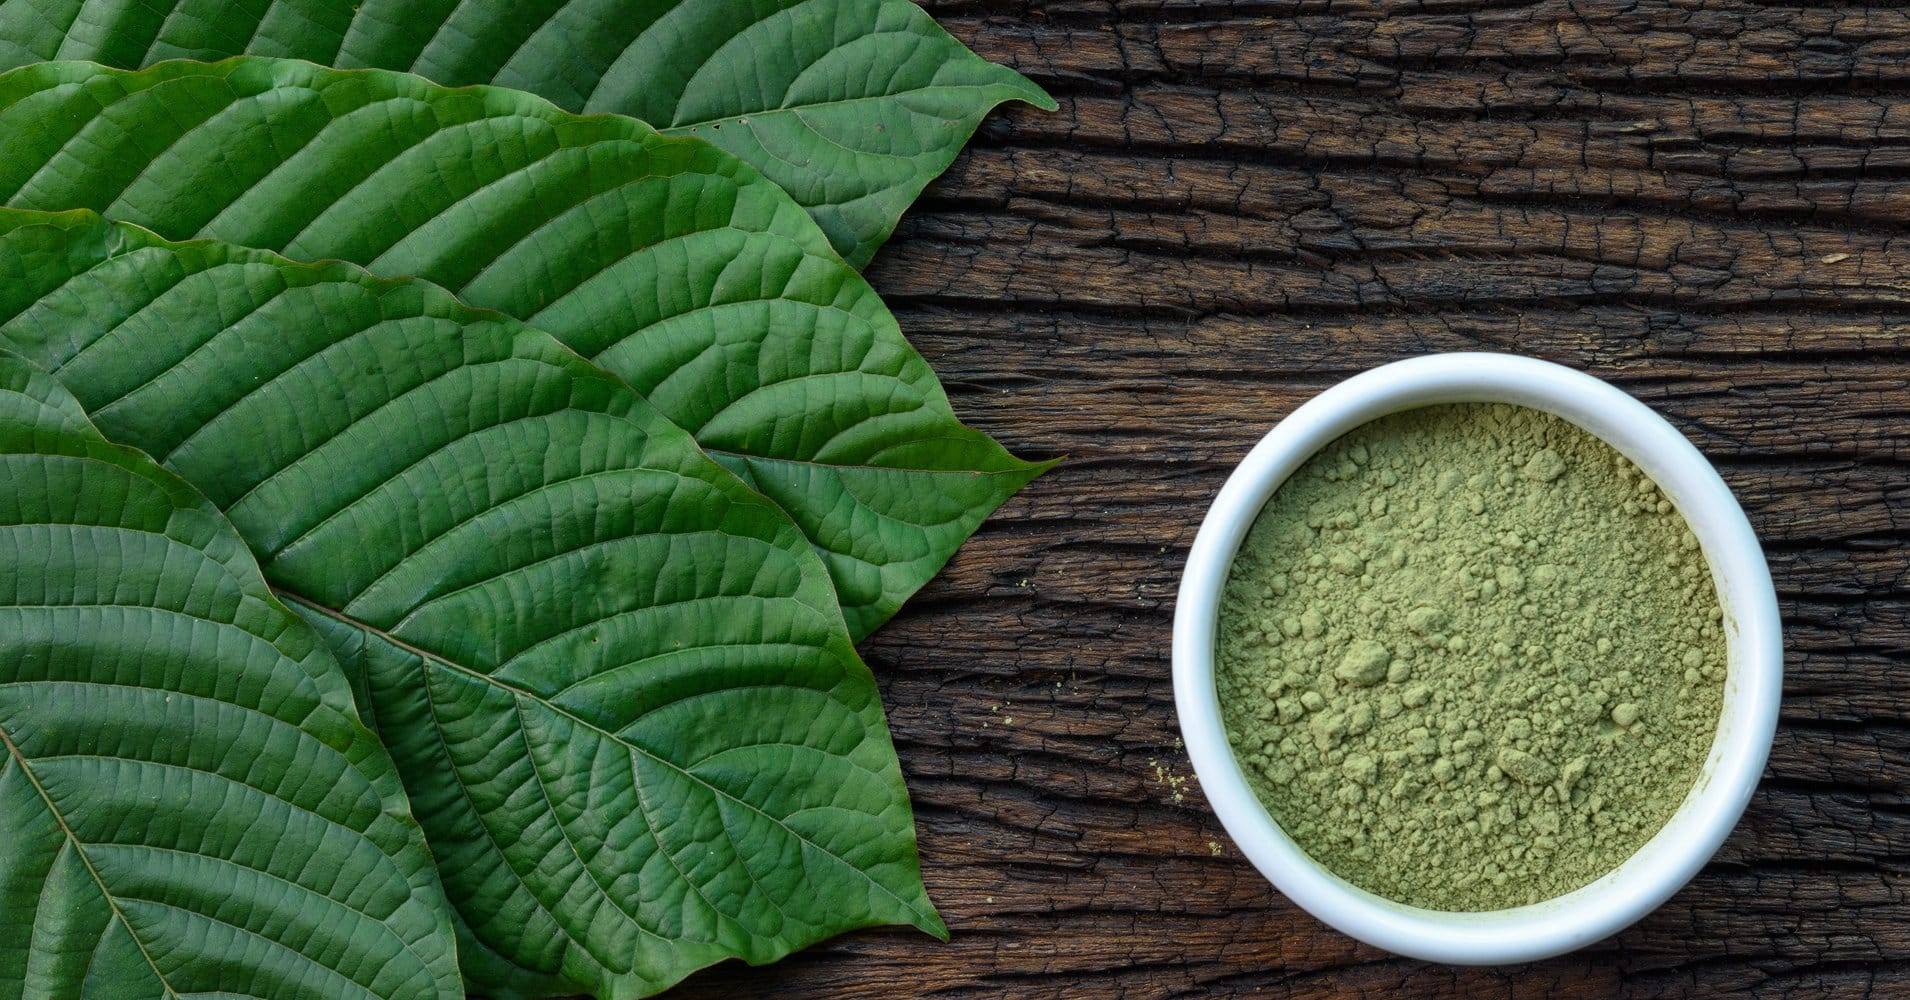 WHAT MAKES A NORMAL KRATOM VENDOR SUCCESSFUL AND LOVEABLE